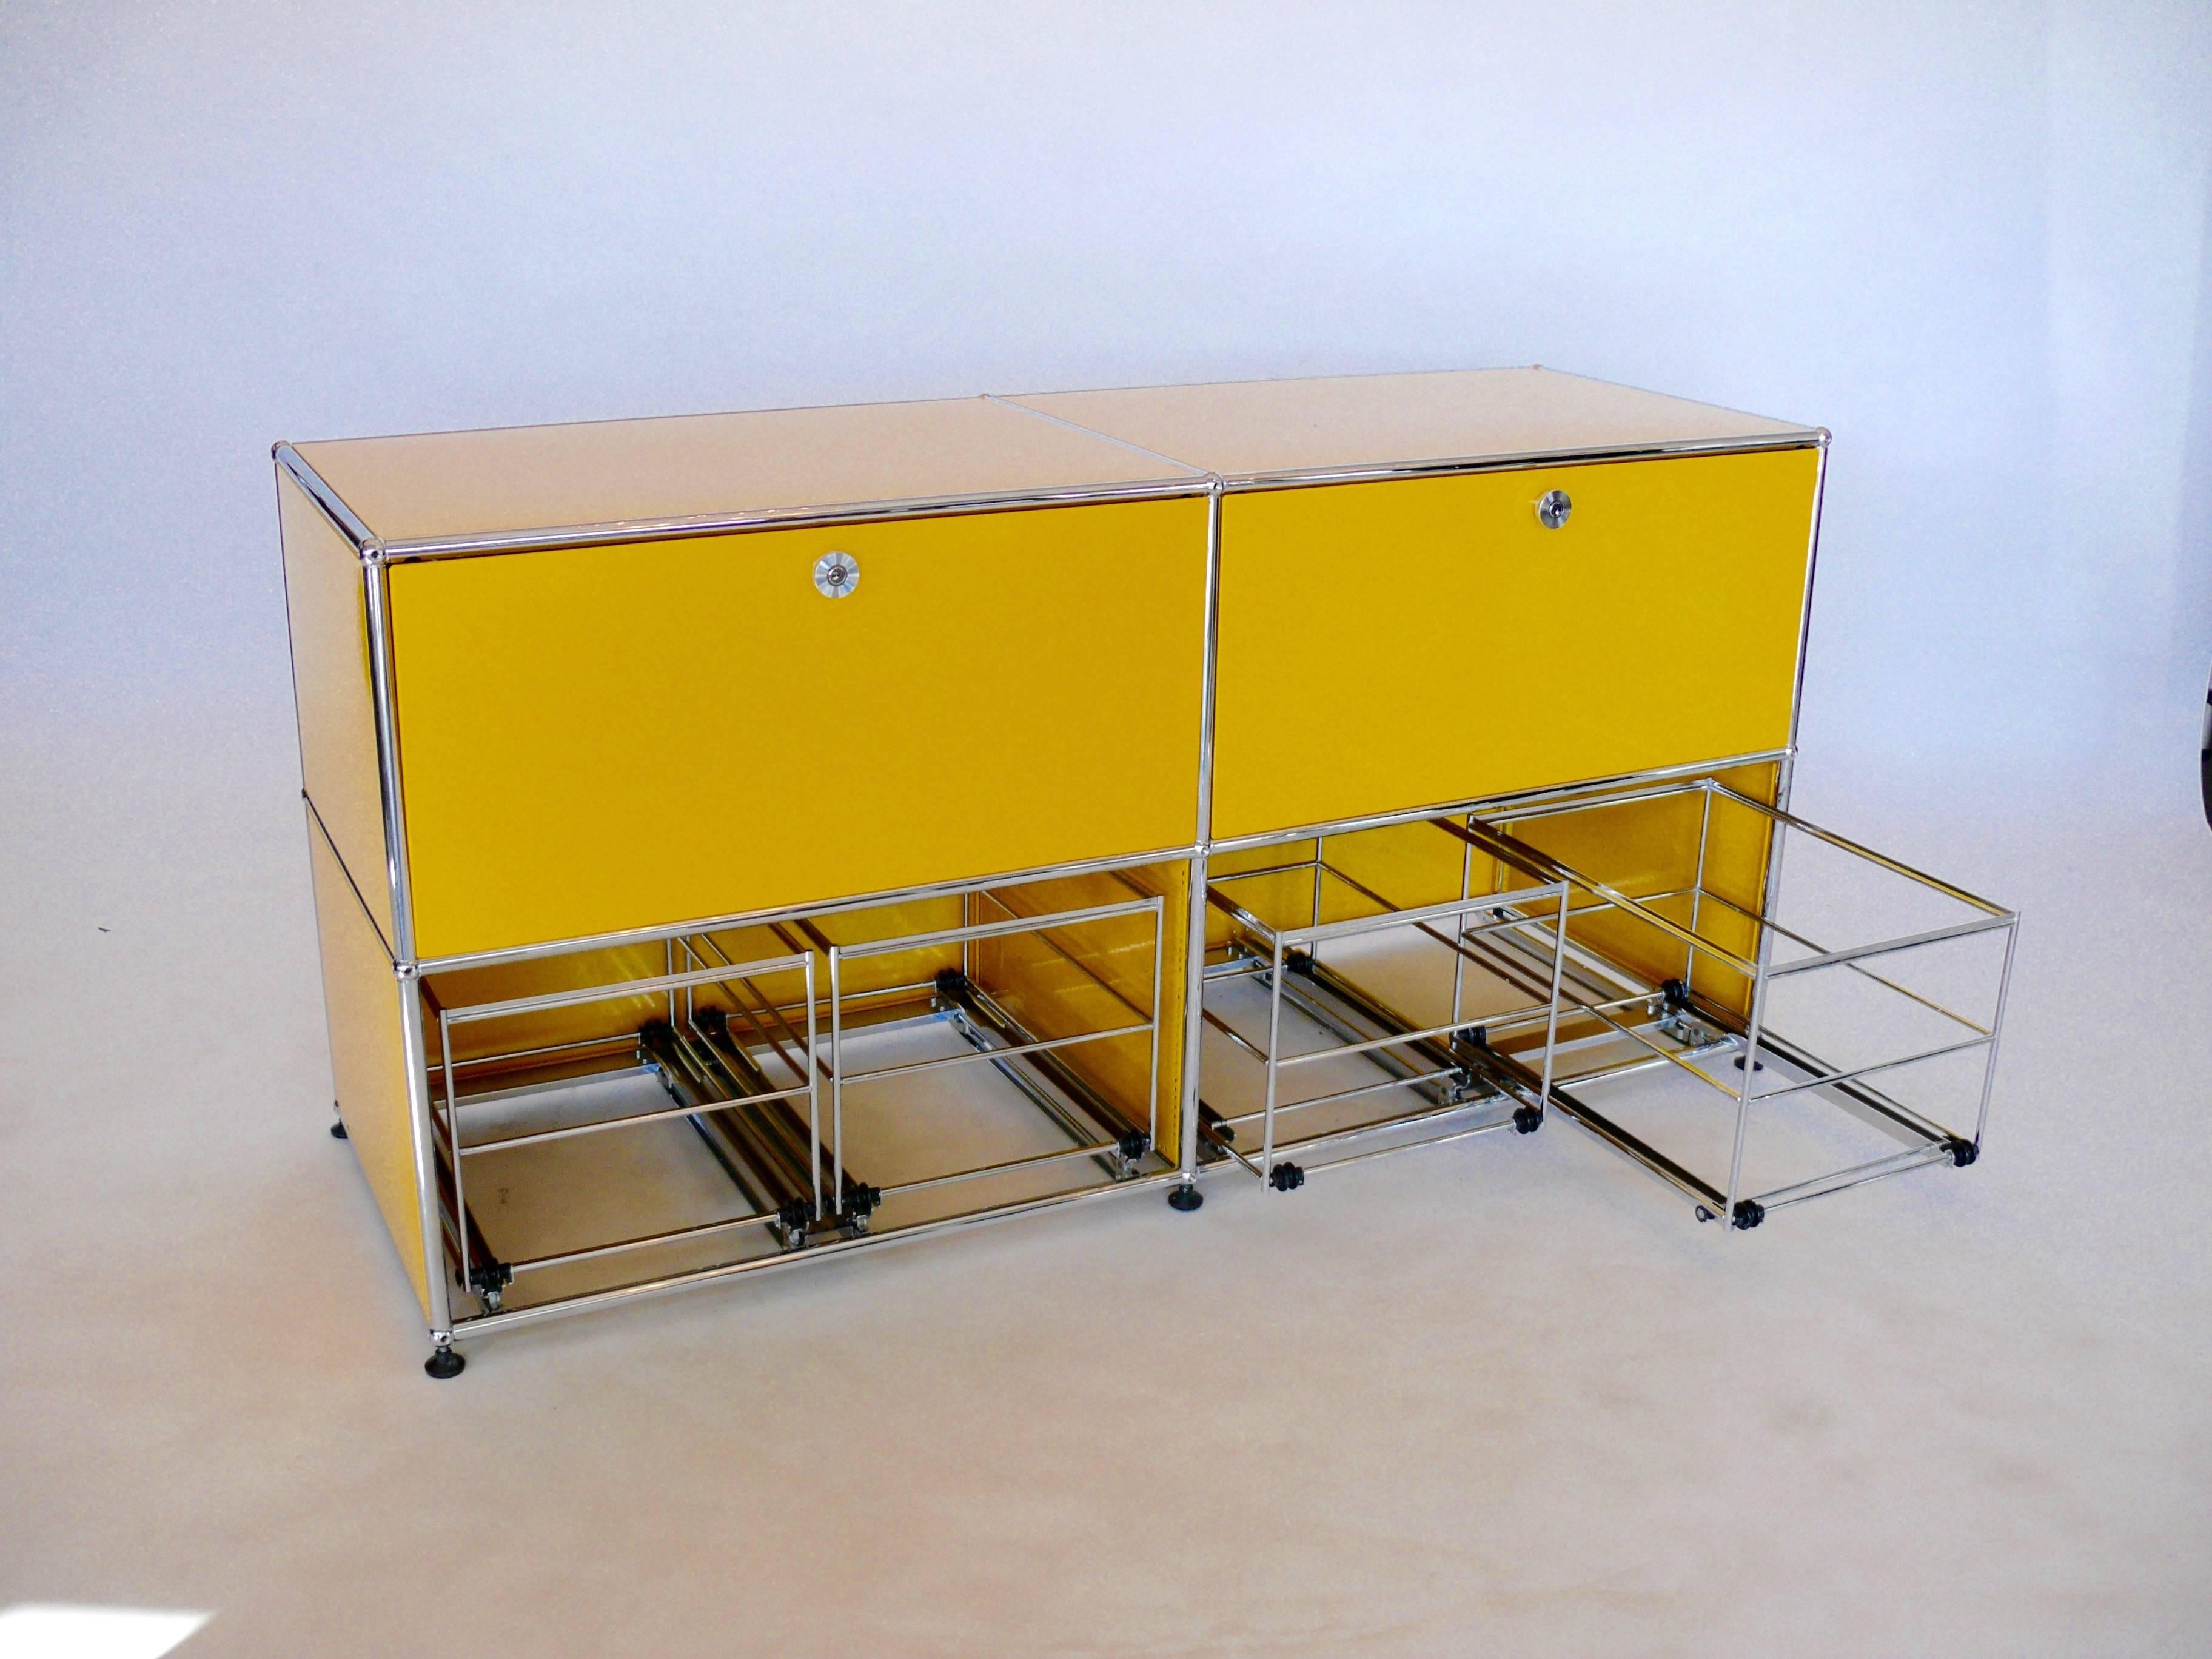 The Fritz Haller modular furniture system originated in 1965 and since then has become a design Classic. The system was accepted into the Design Collection of the Museum of Modern Art (MoMa) in New York (USA) at the end of 2001. Great storage